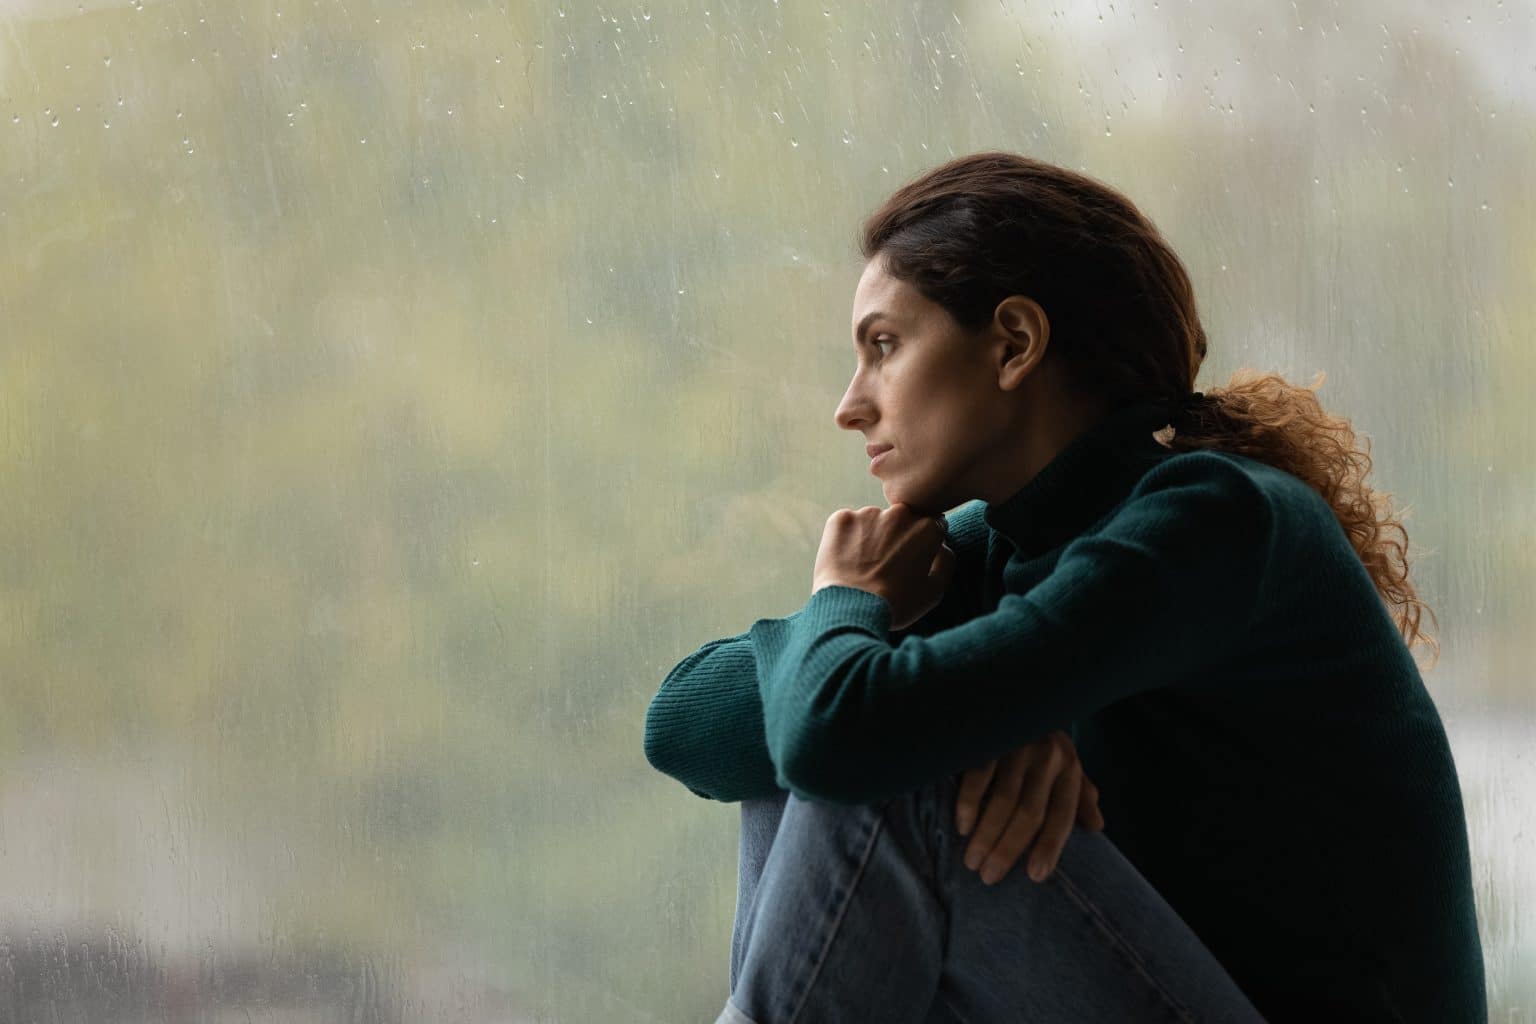 A woman with a sad expression looks out of a window